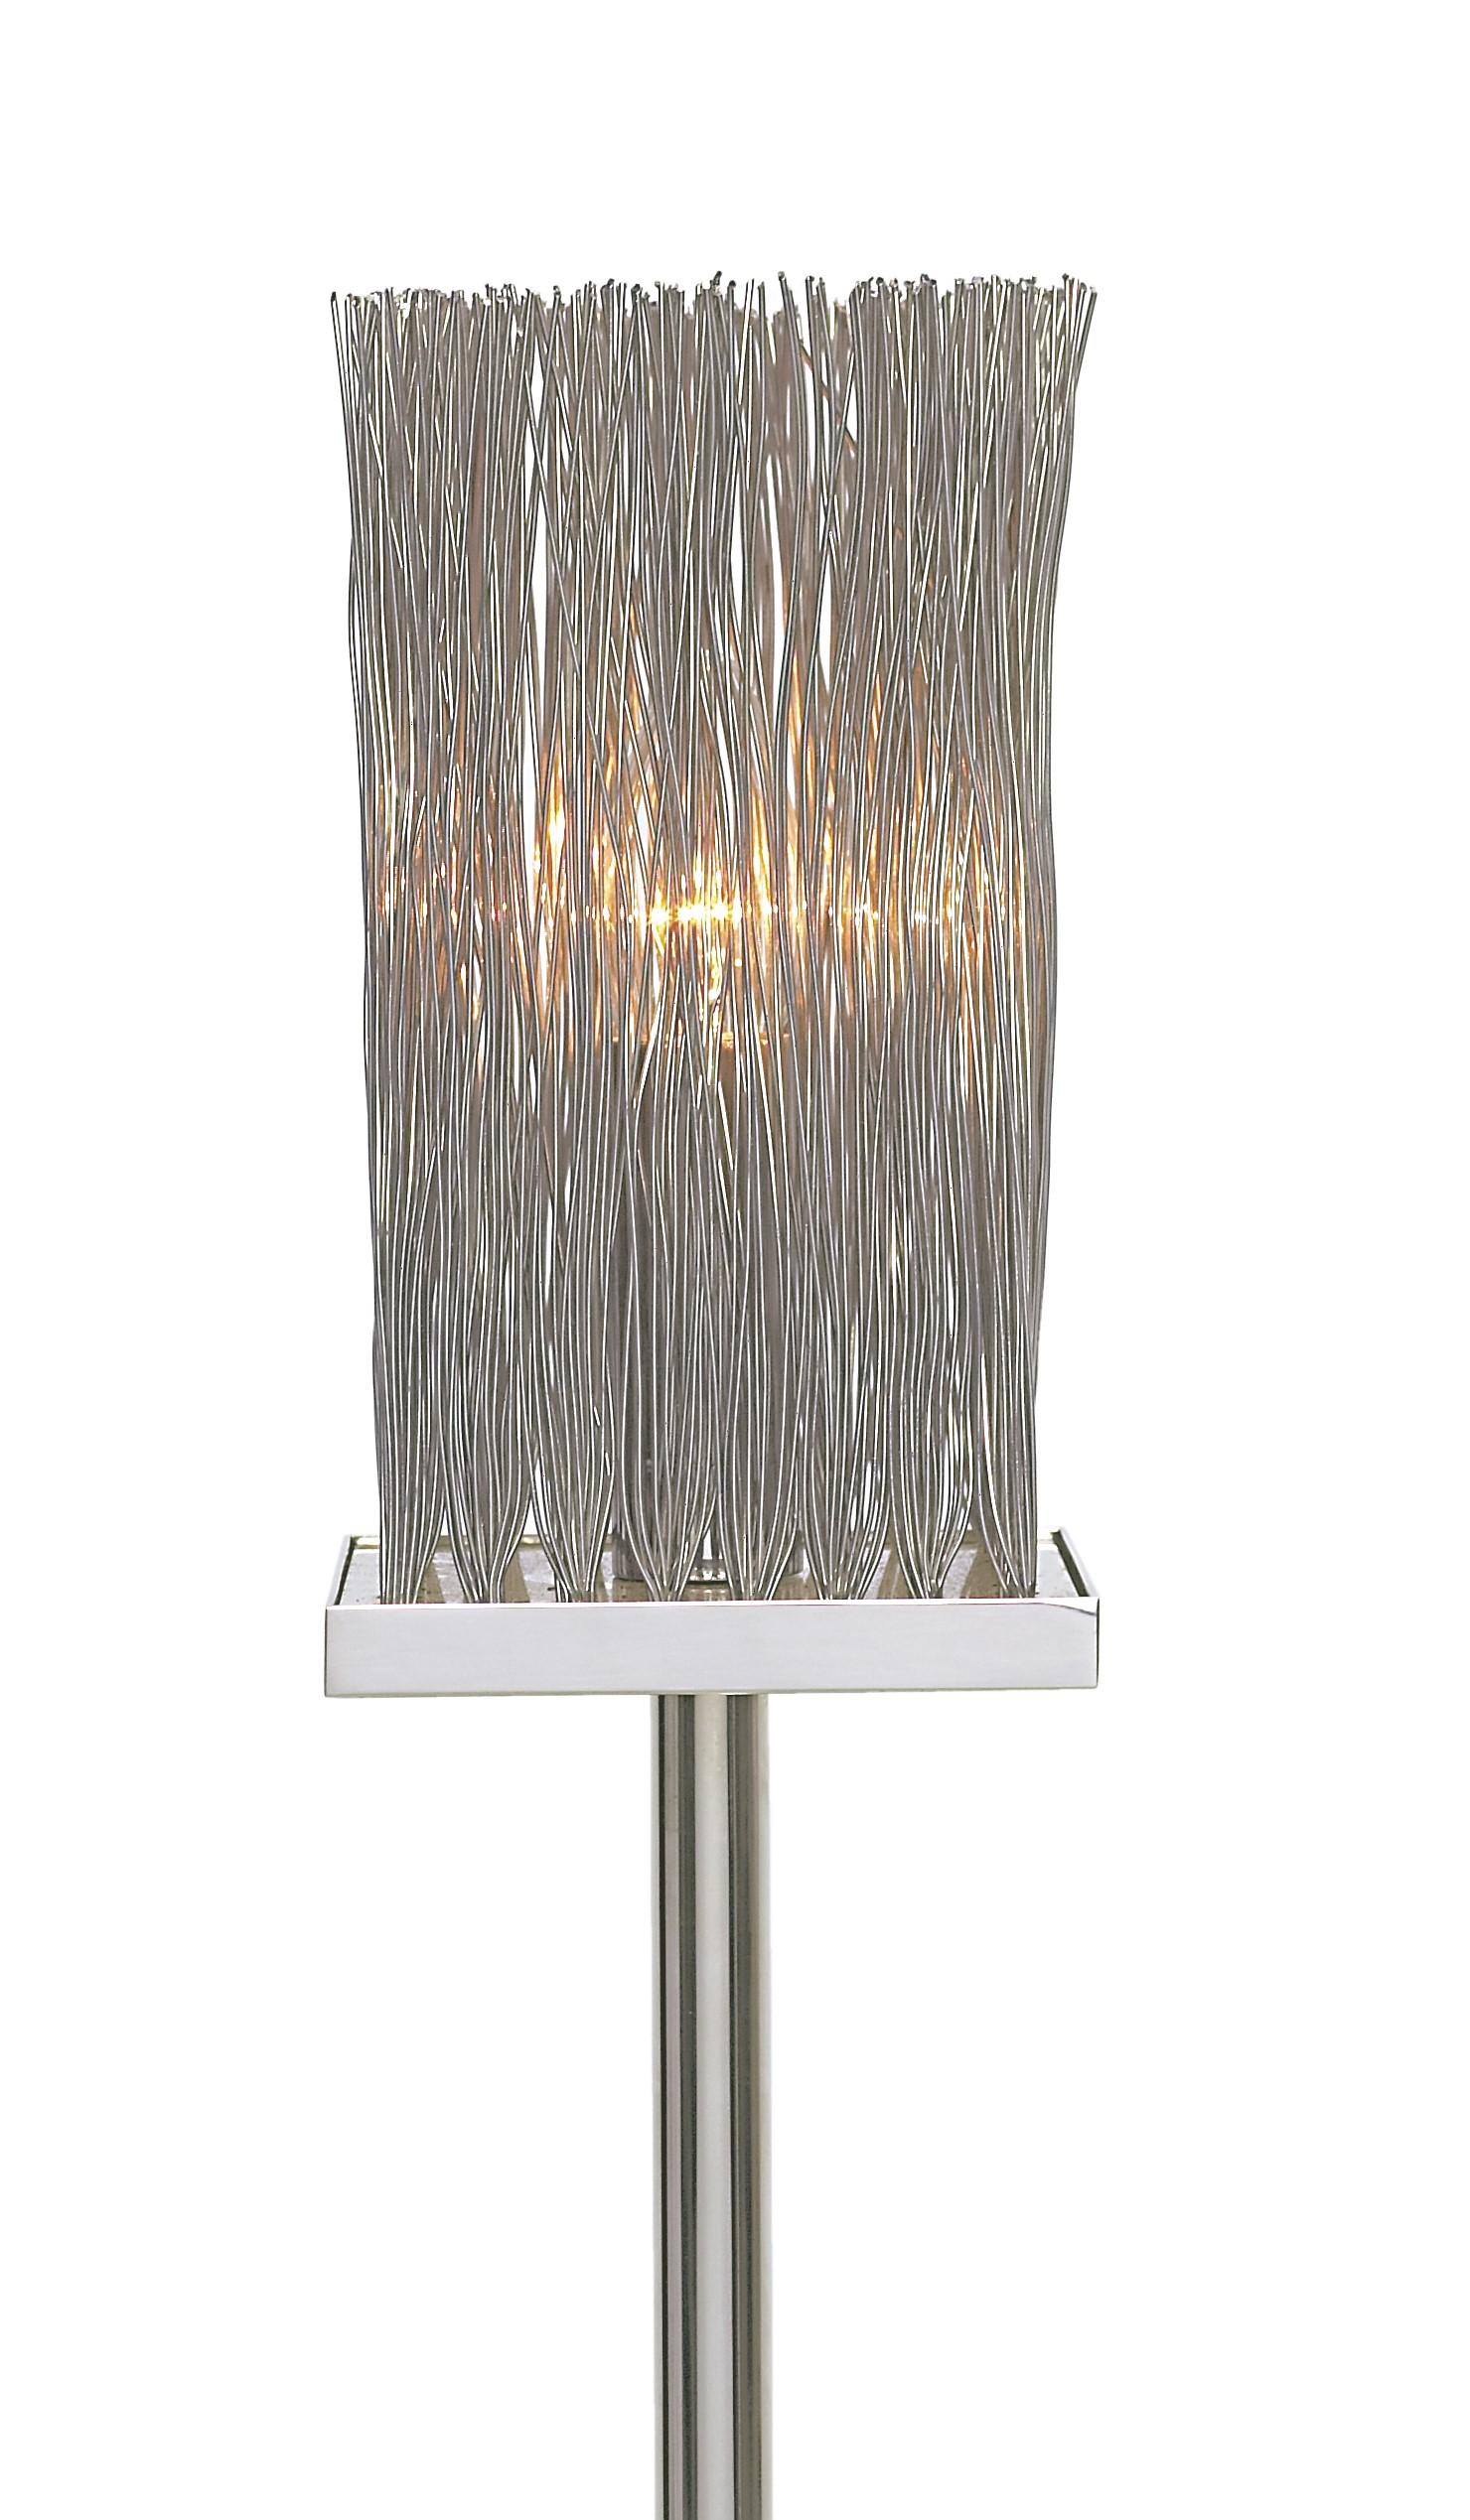 Tall Contemporary Modern Italian Wire Chrome Floor Lamp with chrome base. the chrome base is a heavy chrome piece that provides weight for stability. This chrome floor lamp has a wired top that is attractive and allows light to flow through. 